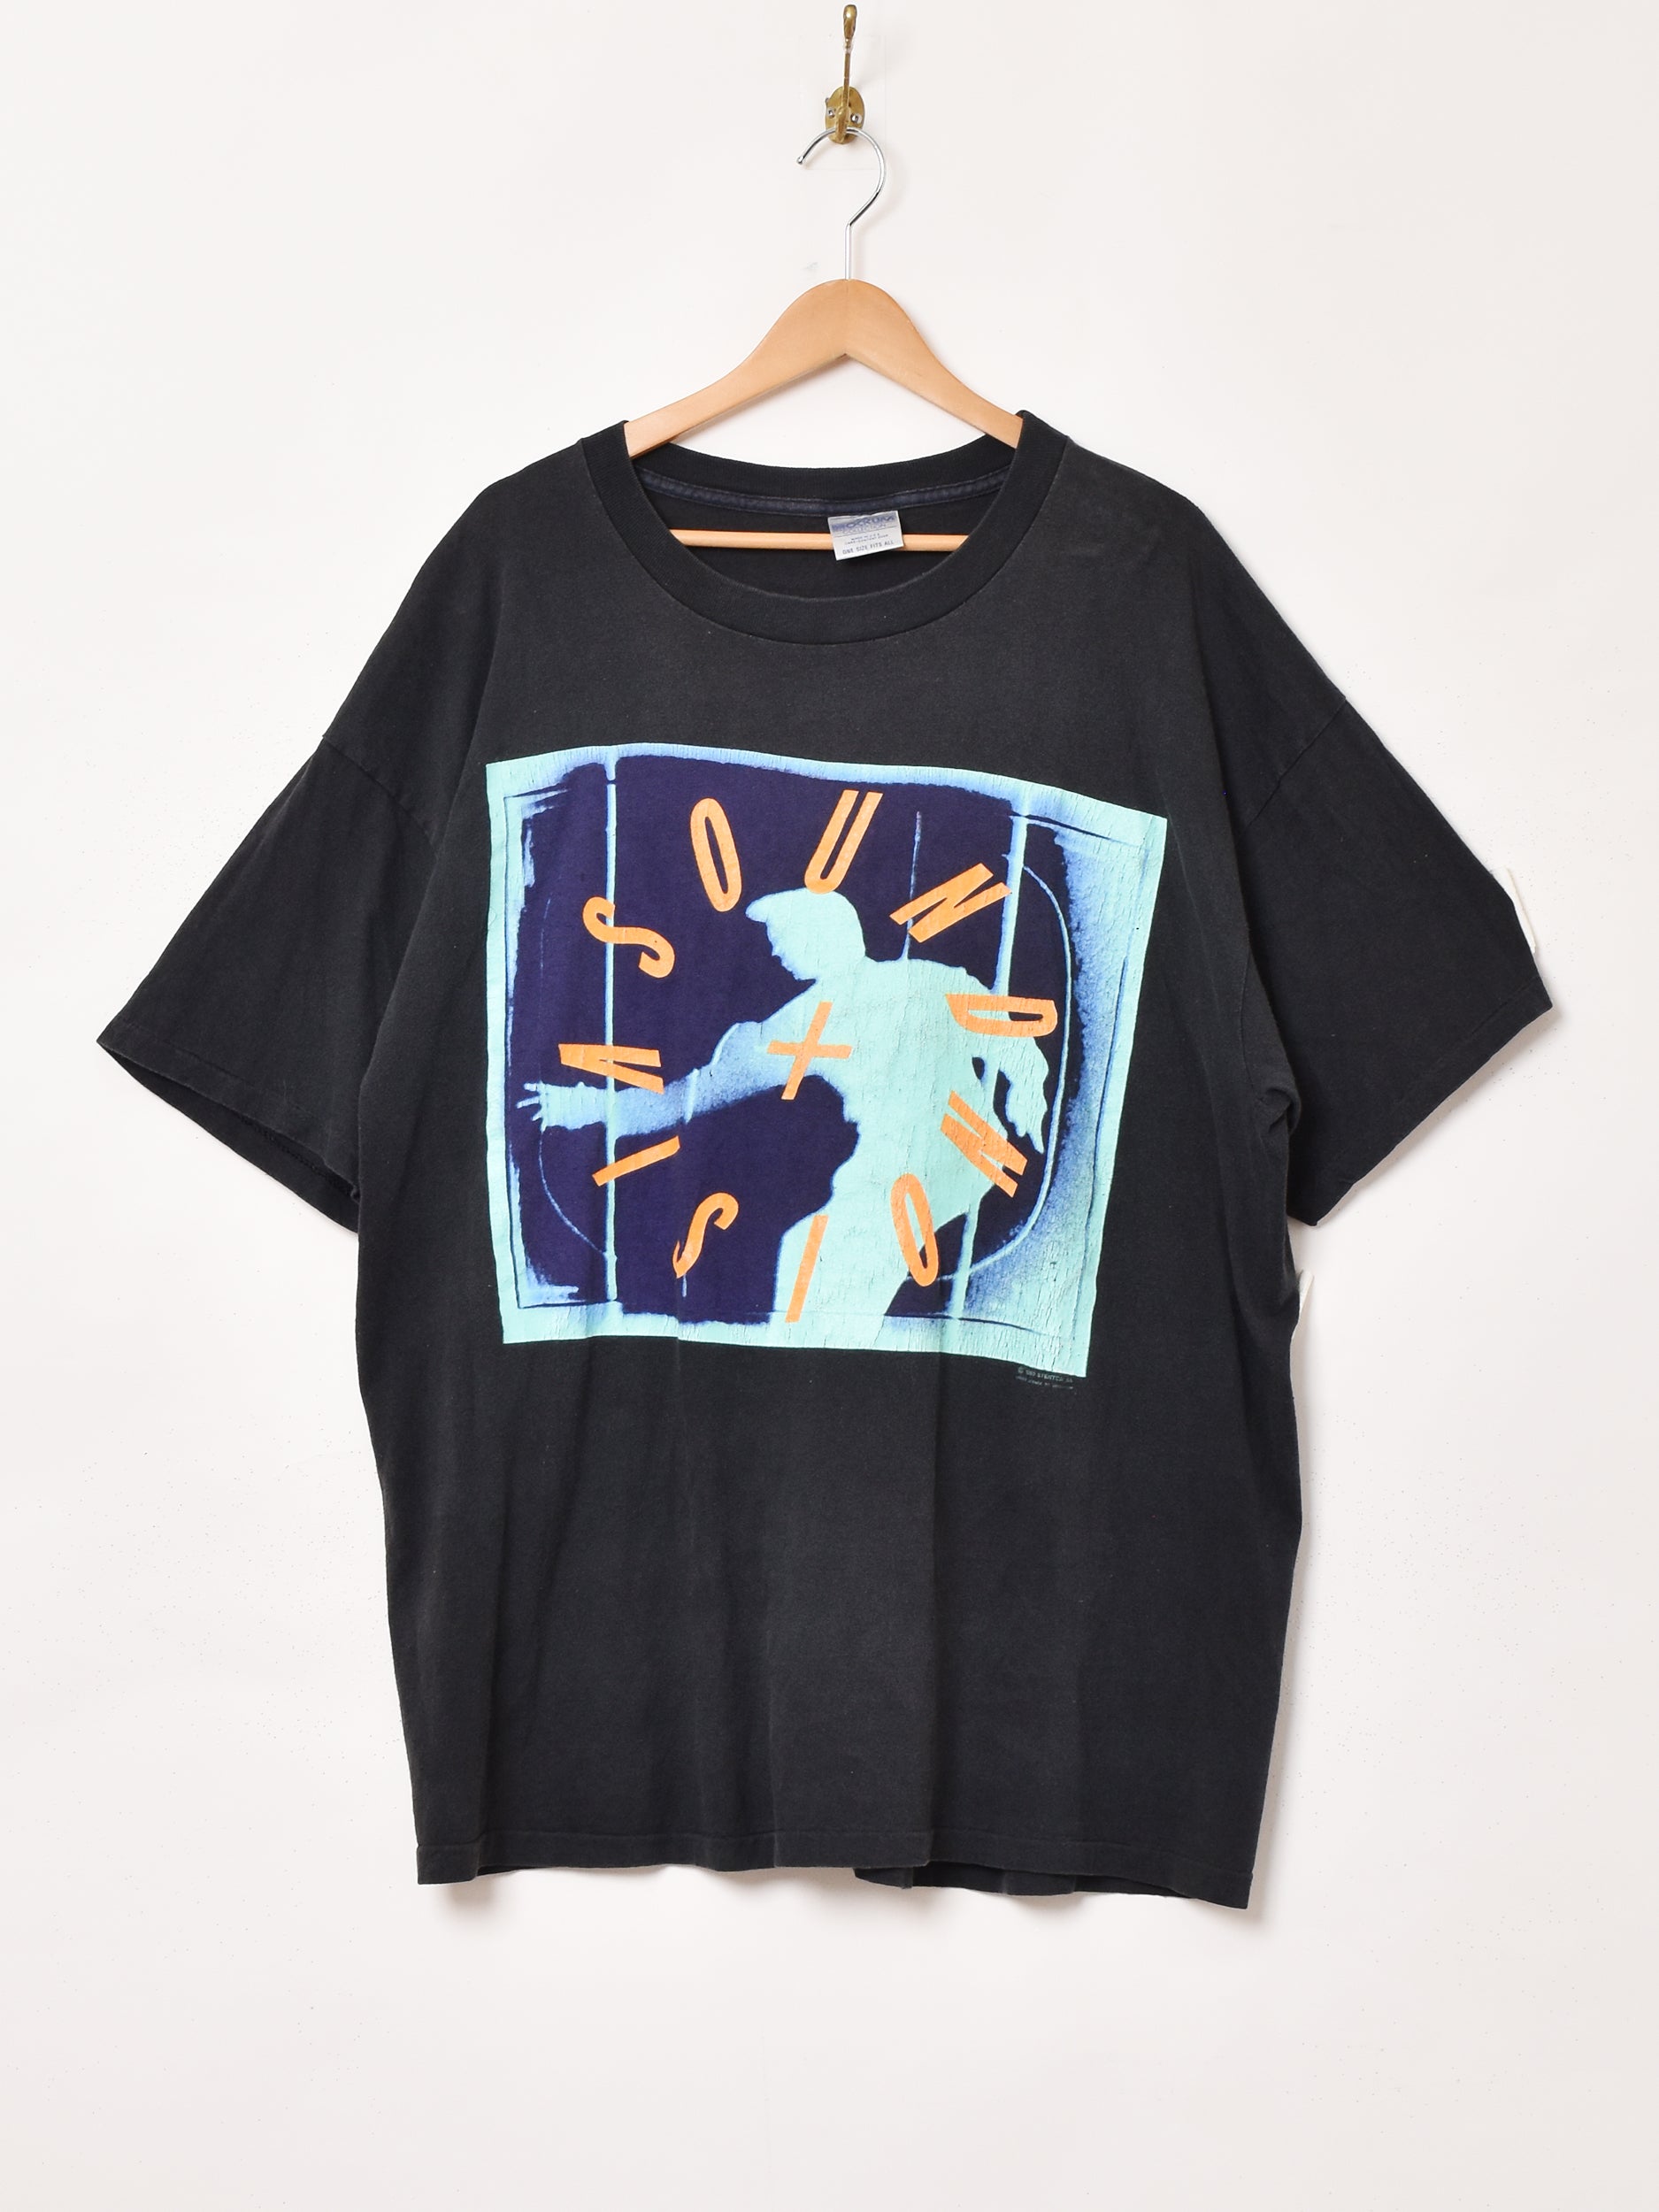 90's〜 アメリカ製 David Bowie プリントTシャツ – 古着屋Top of the 